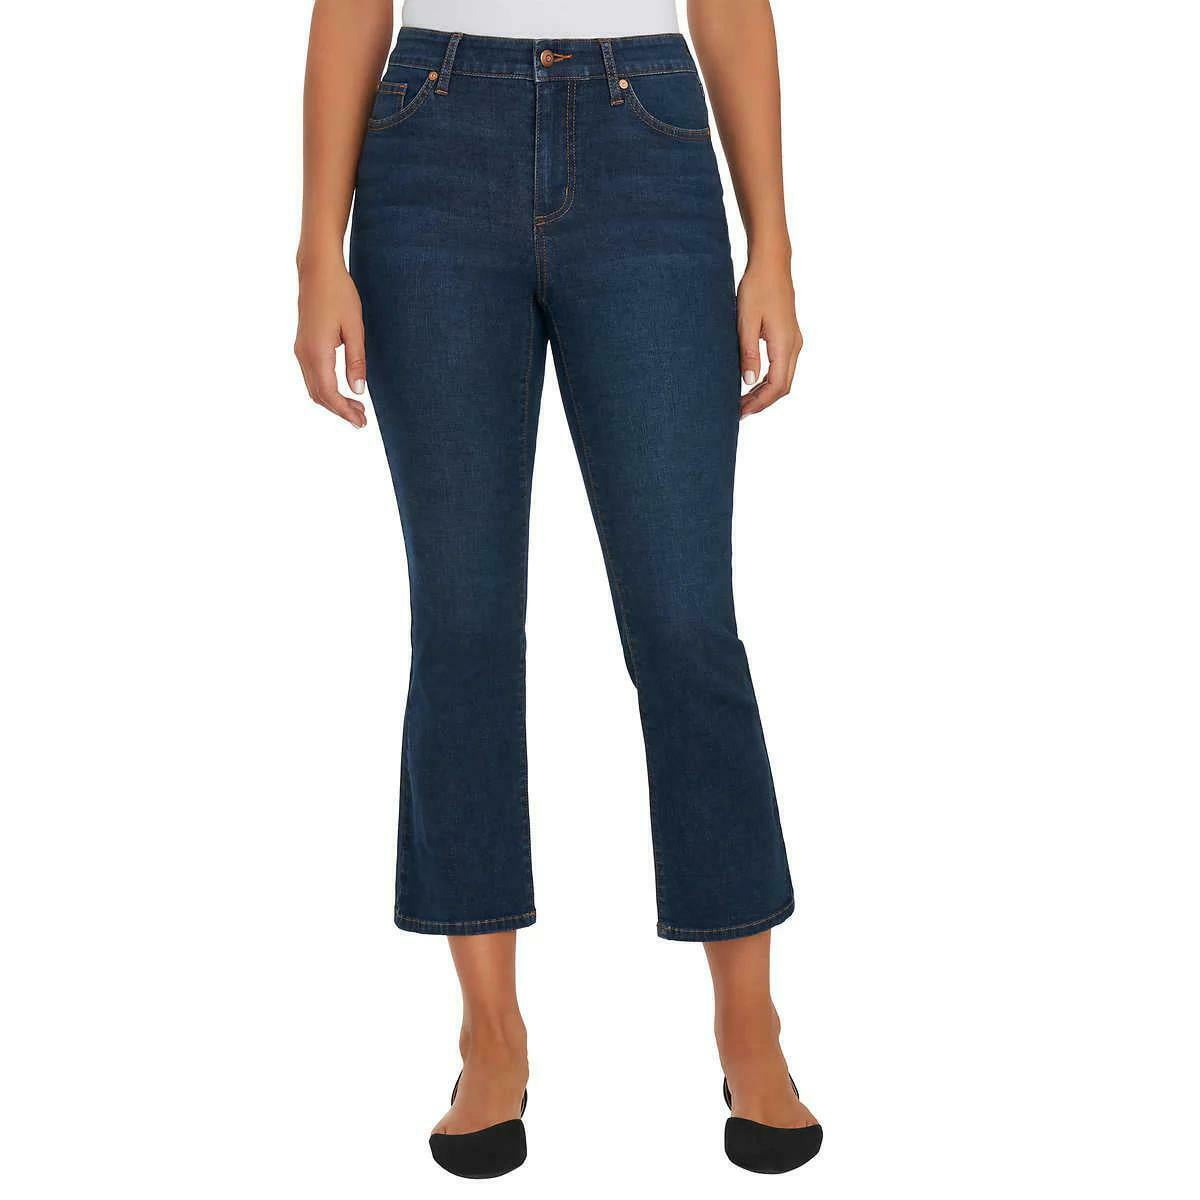 CHAPS Jeans Womens